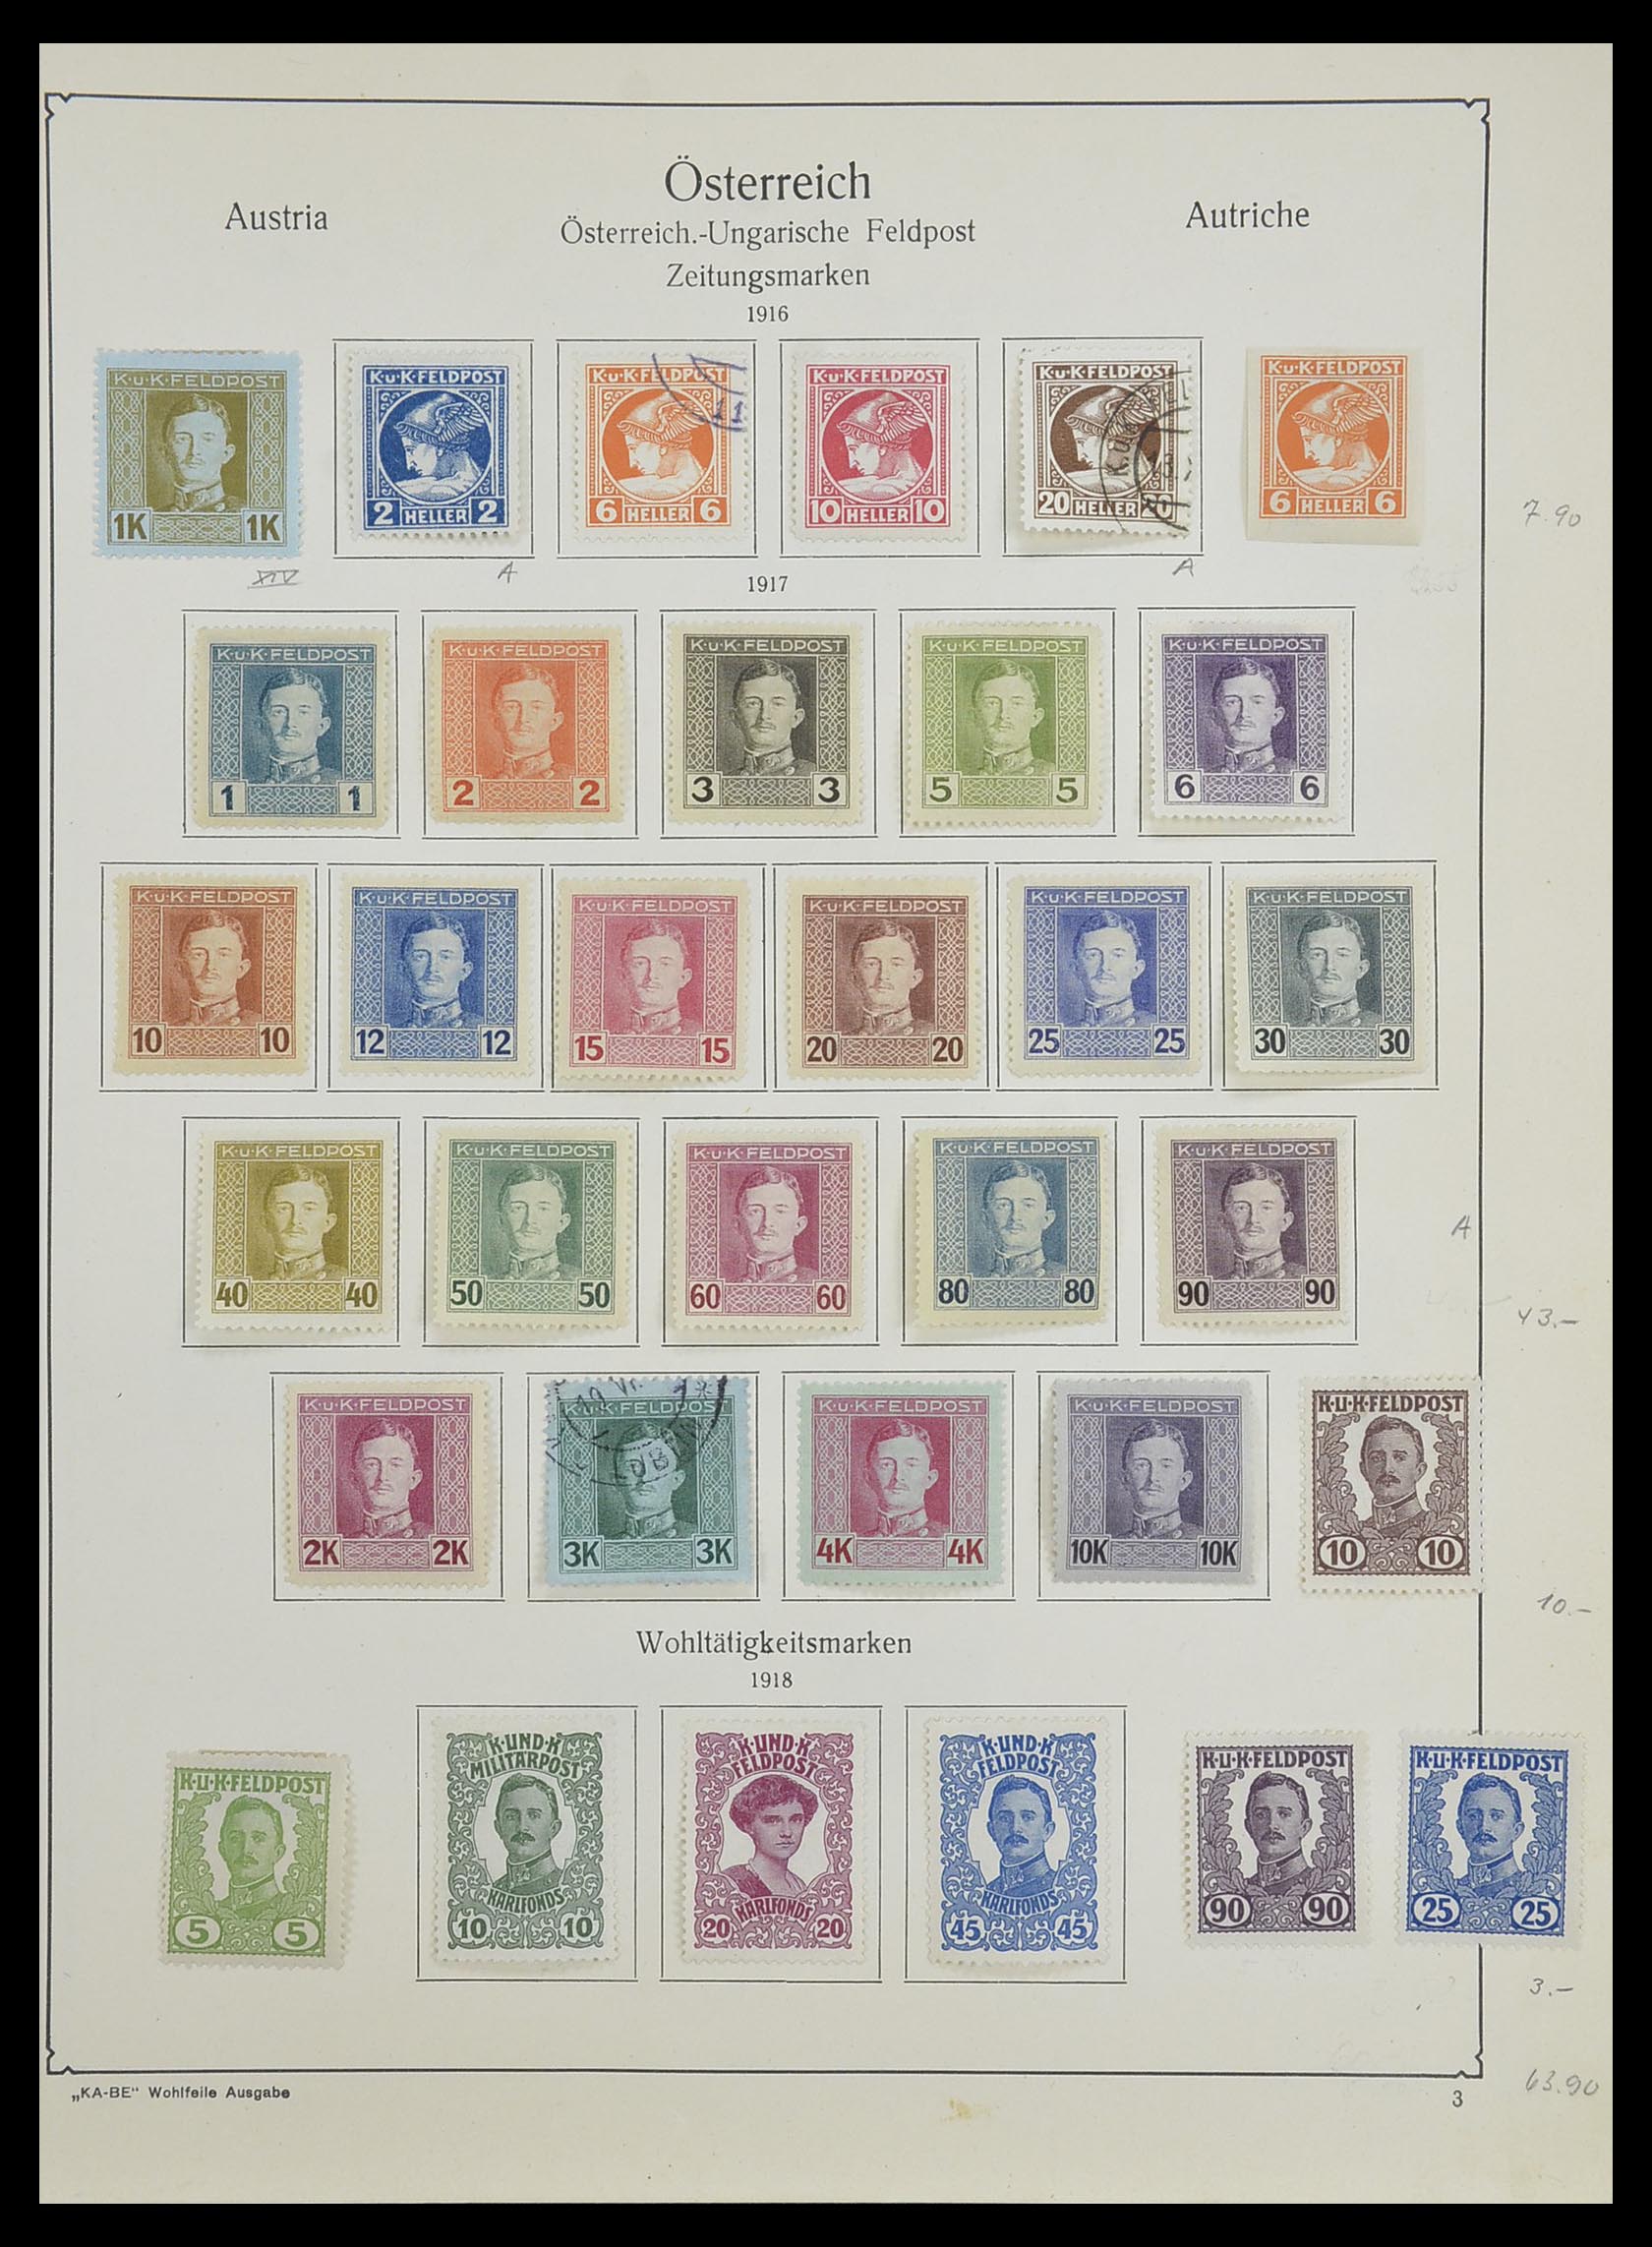 33593 086 - Stamp collection 33593 Austria and territories 1850-1959.